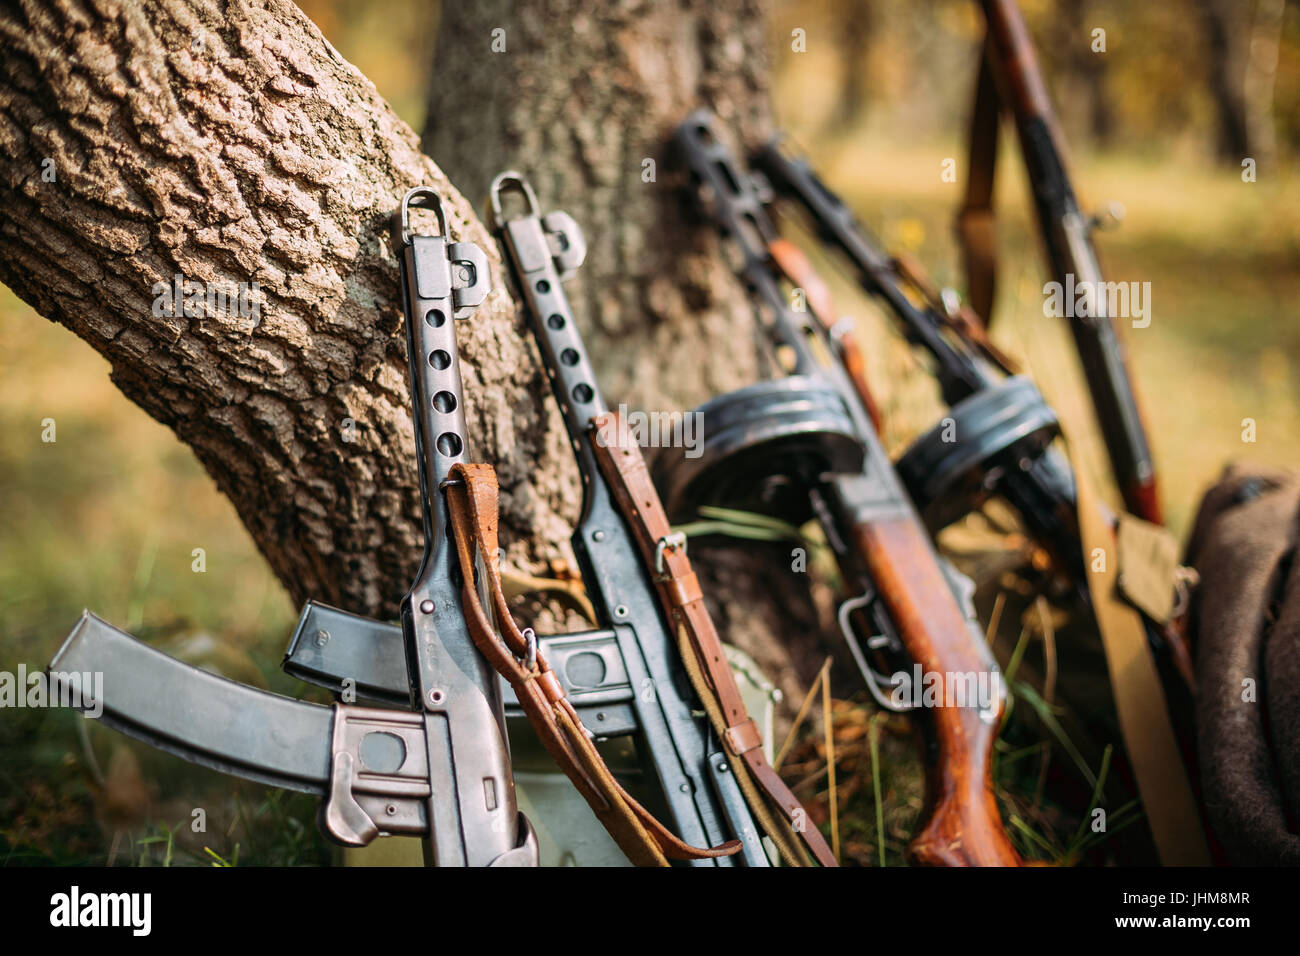 Soviet Russian Military Ammunition Weapon Of World War II. PPS-43 And PPSh-41 Submachine Gun Leaning Against Trunk Of Tree. Weapon Of Red Army. Stock Photo